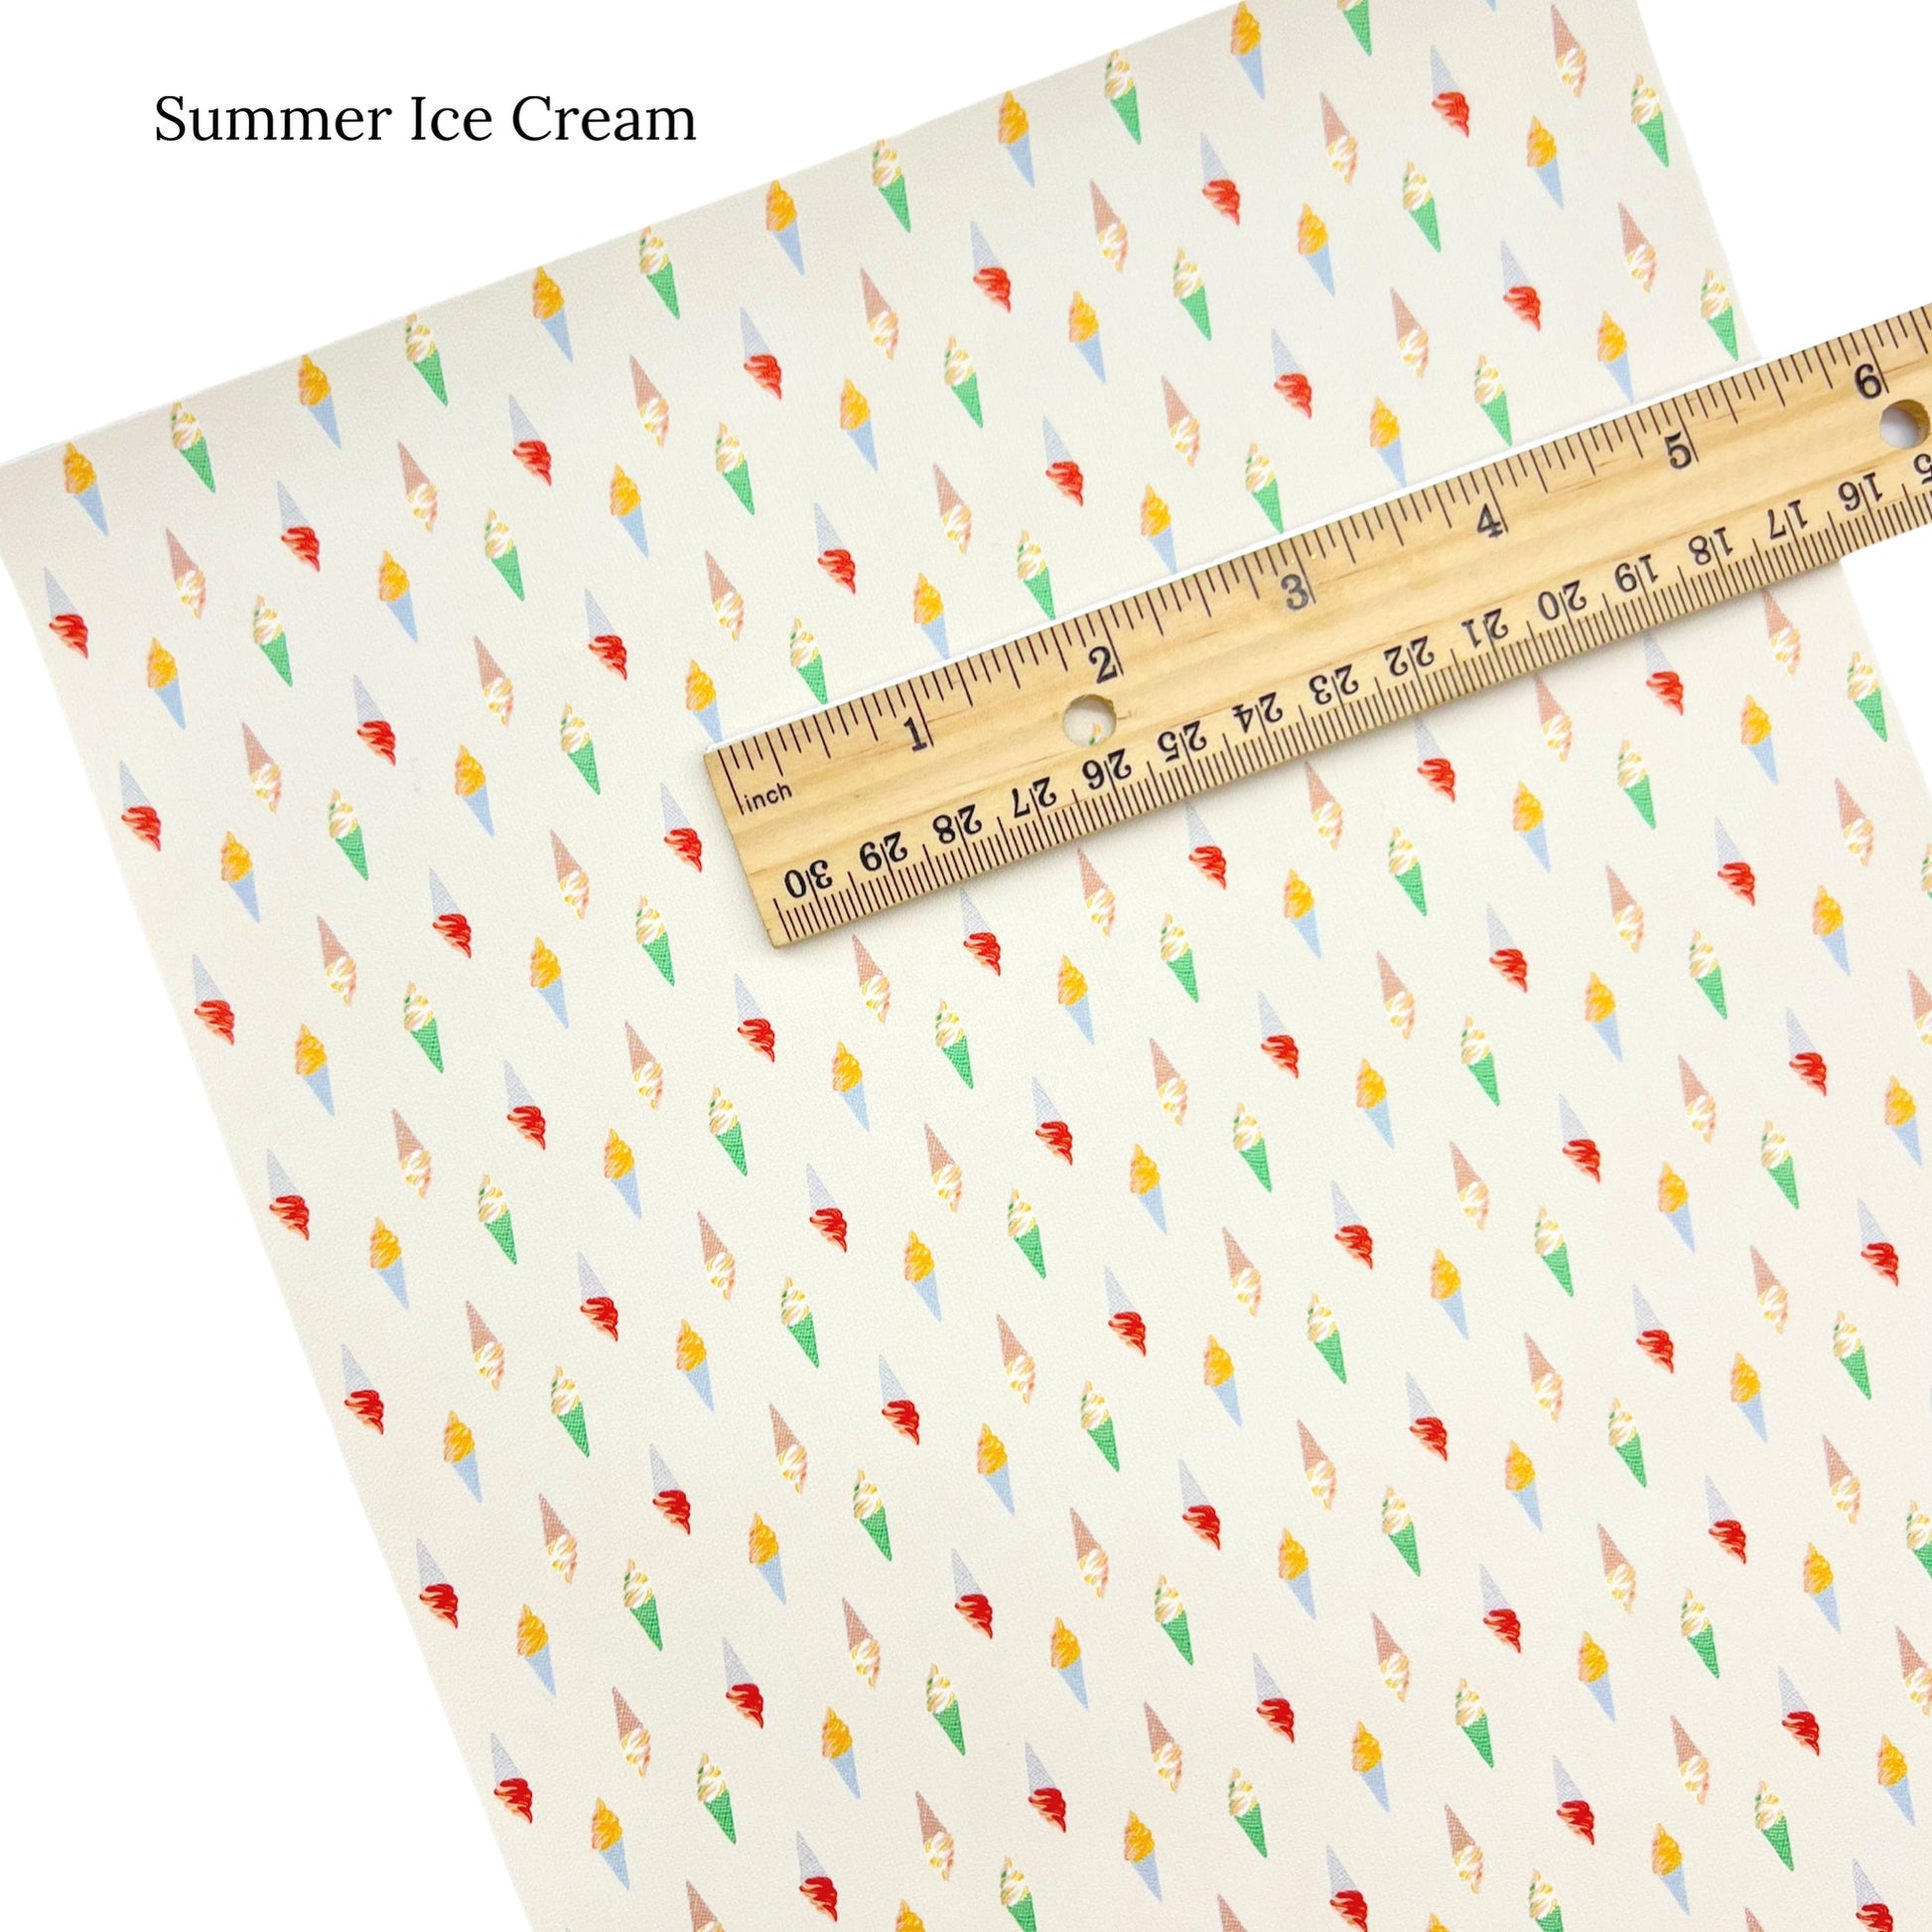 Ice cream cones for summer faux leather sheet.